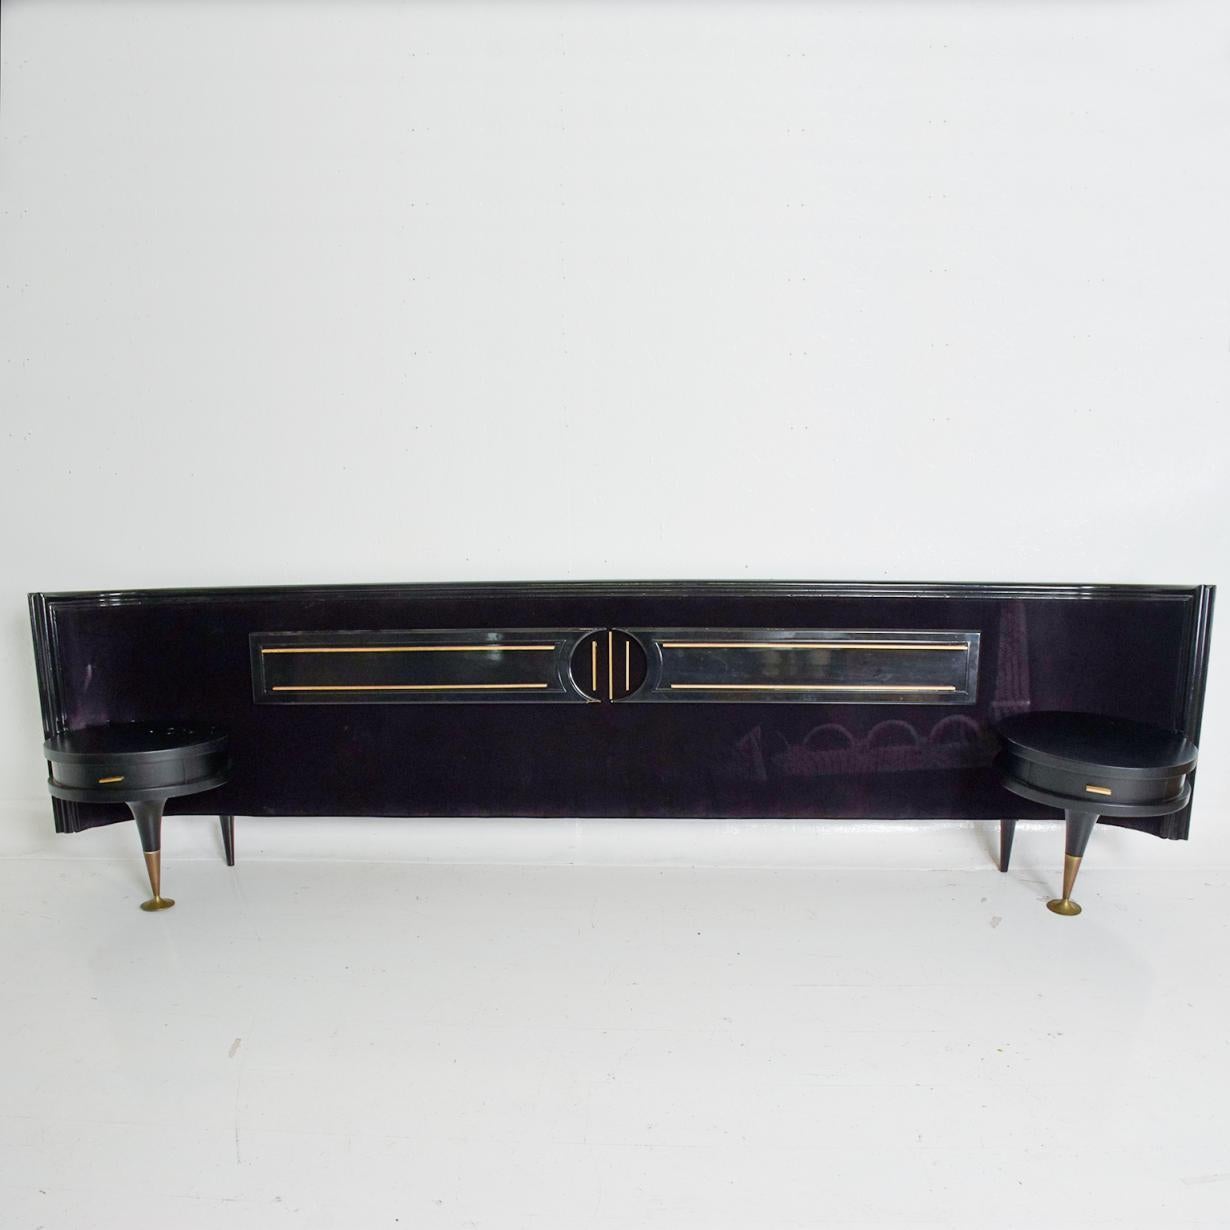 For your consideration, a midcentury Mexican modernist king size headboard with nightstands Frank Kyle.


Made in Mexico, circa 1950s.


Mahogany wood with a black finish and purple velvet upholstery. Brass accents.


Dimensions: 126 1/2